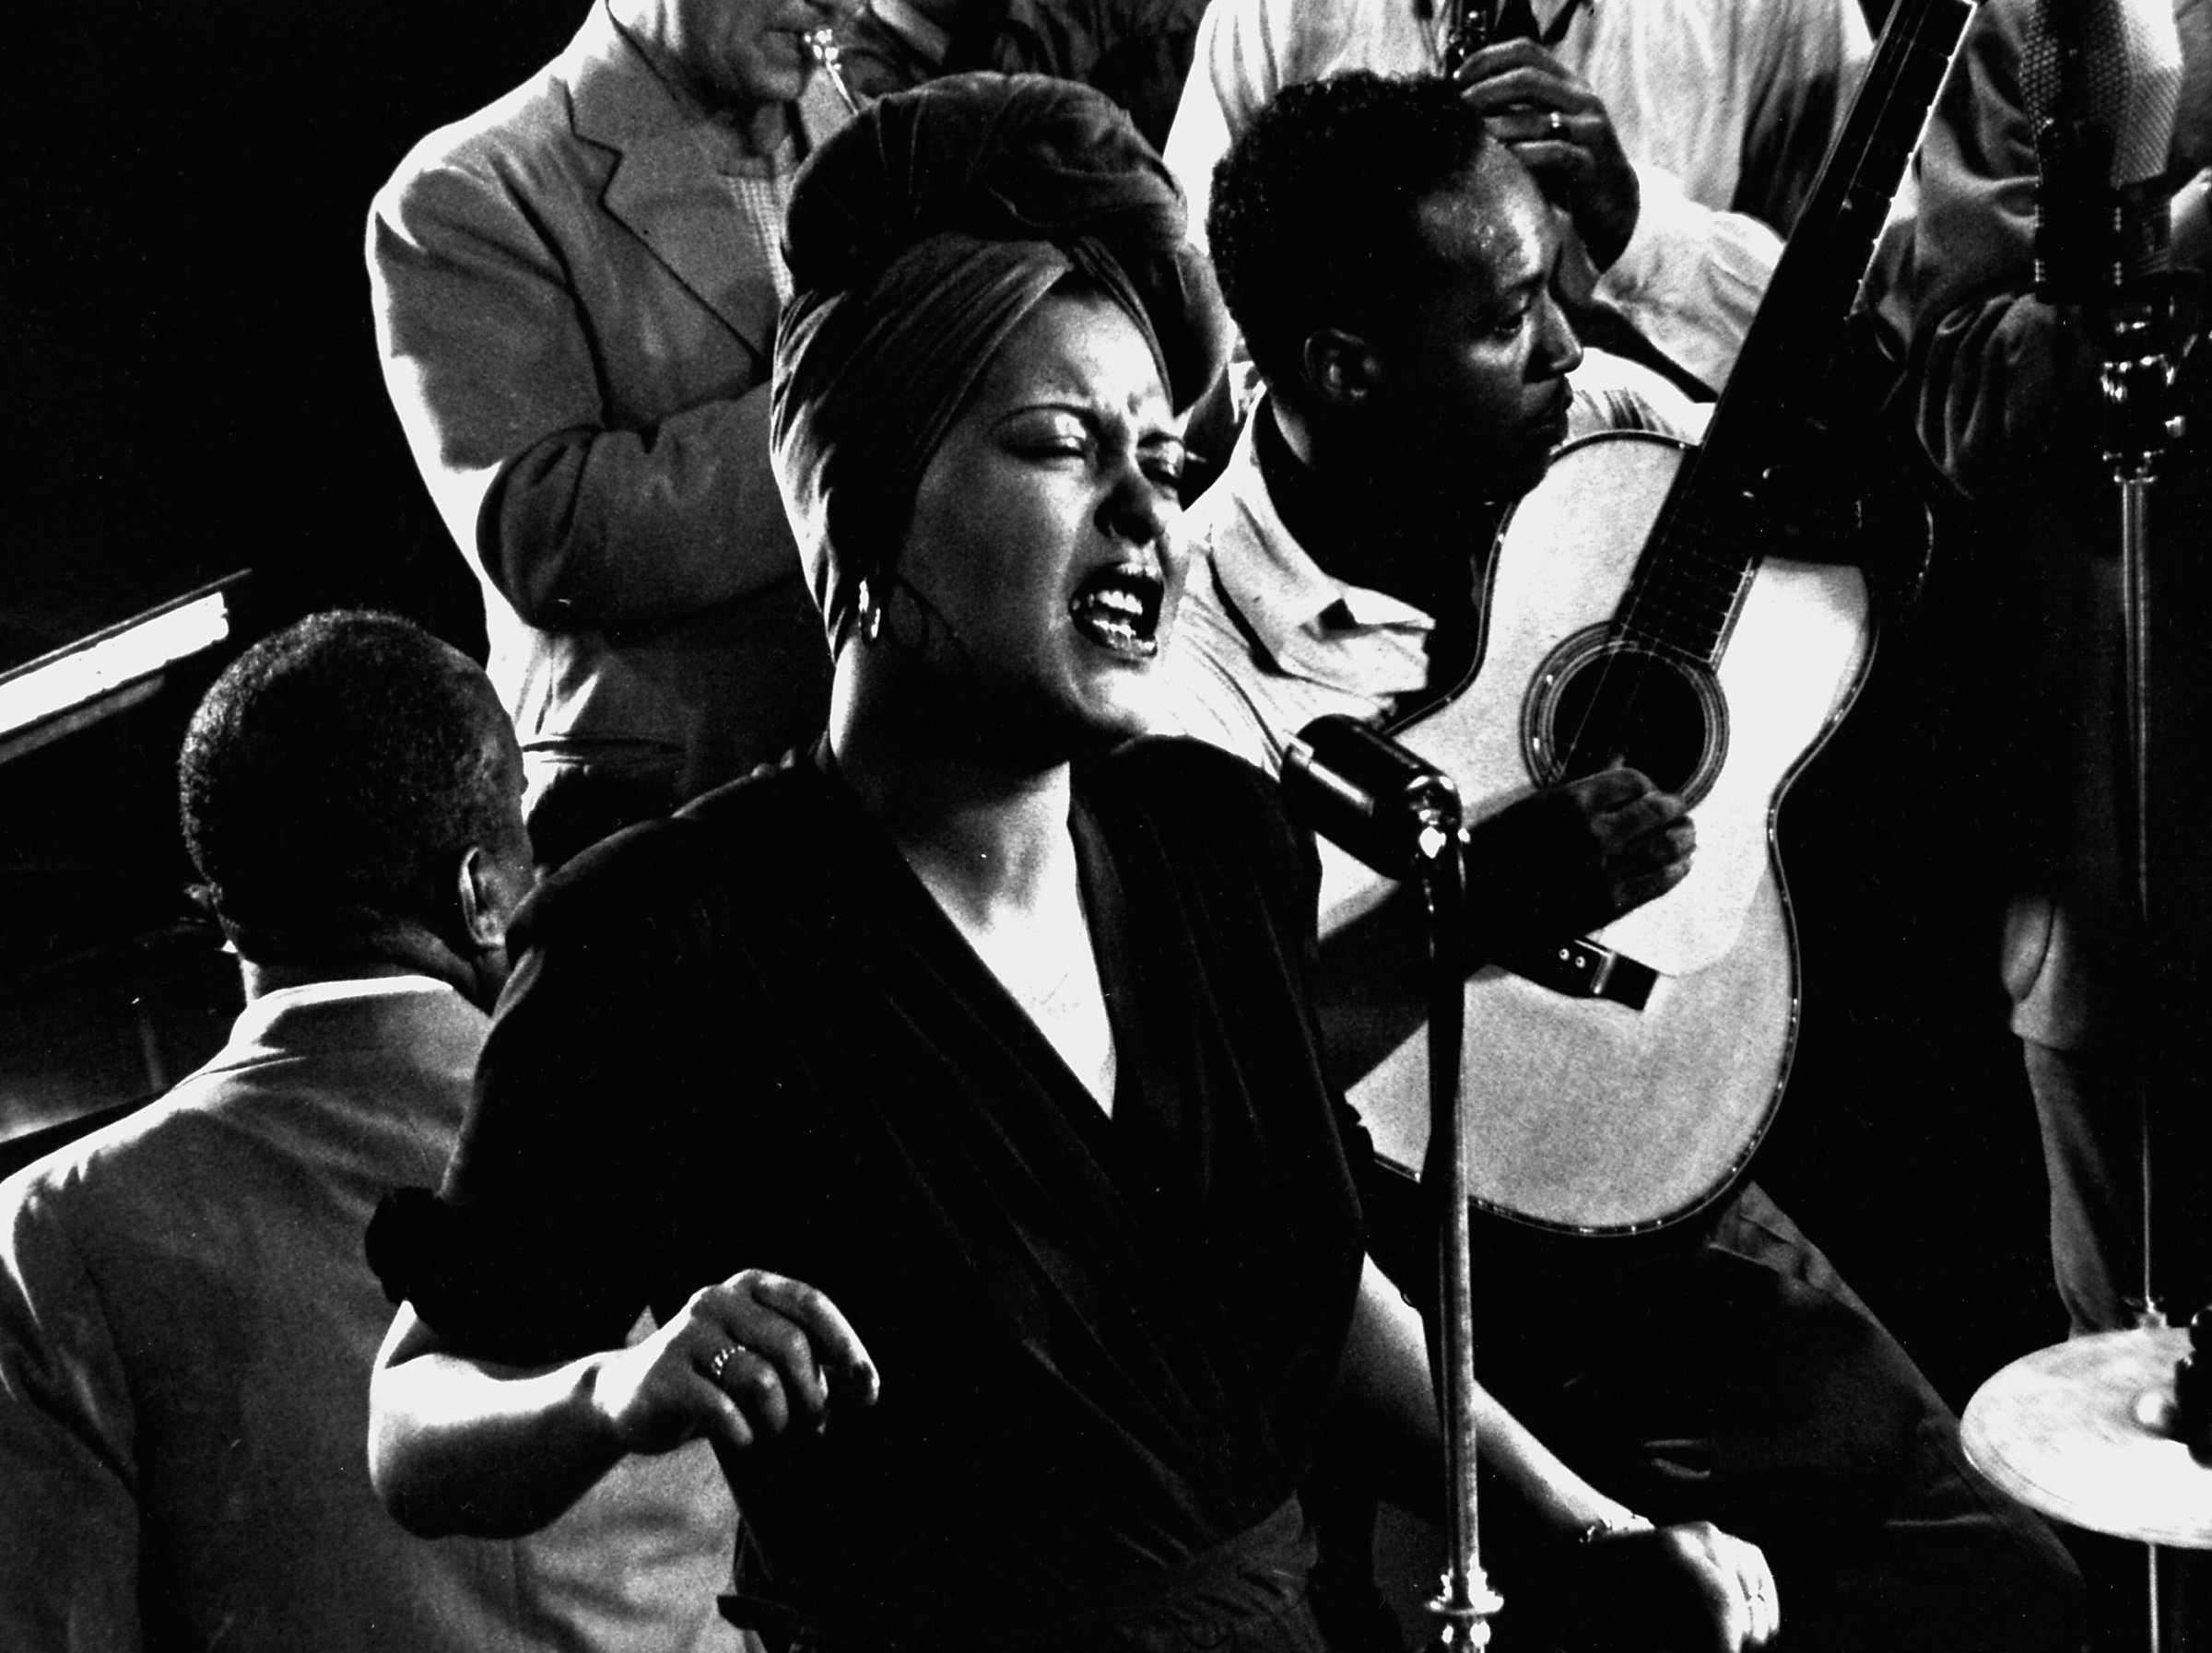 Billie Holiday sings her standard, "Fine and Mellow," accompanied by James P. Johnson on piano and others, New York, 1943.